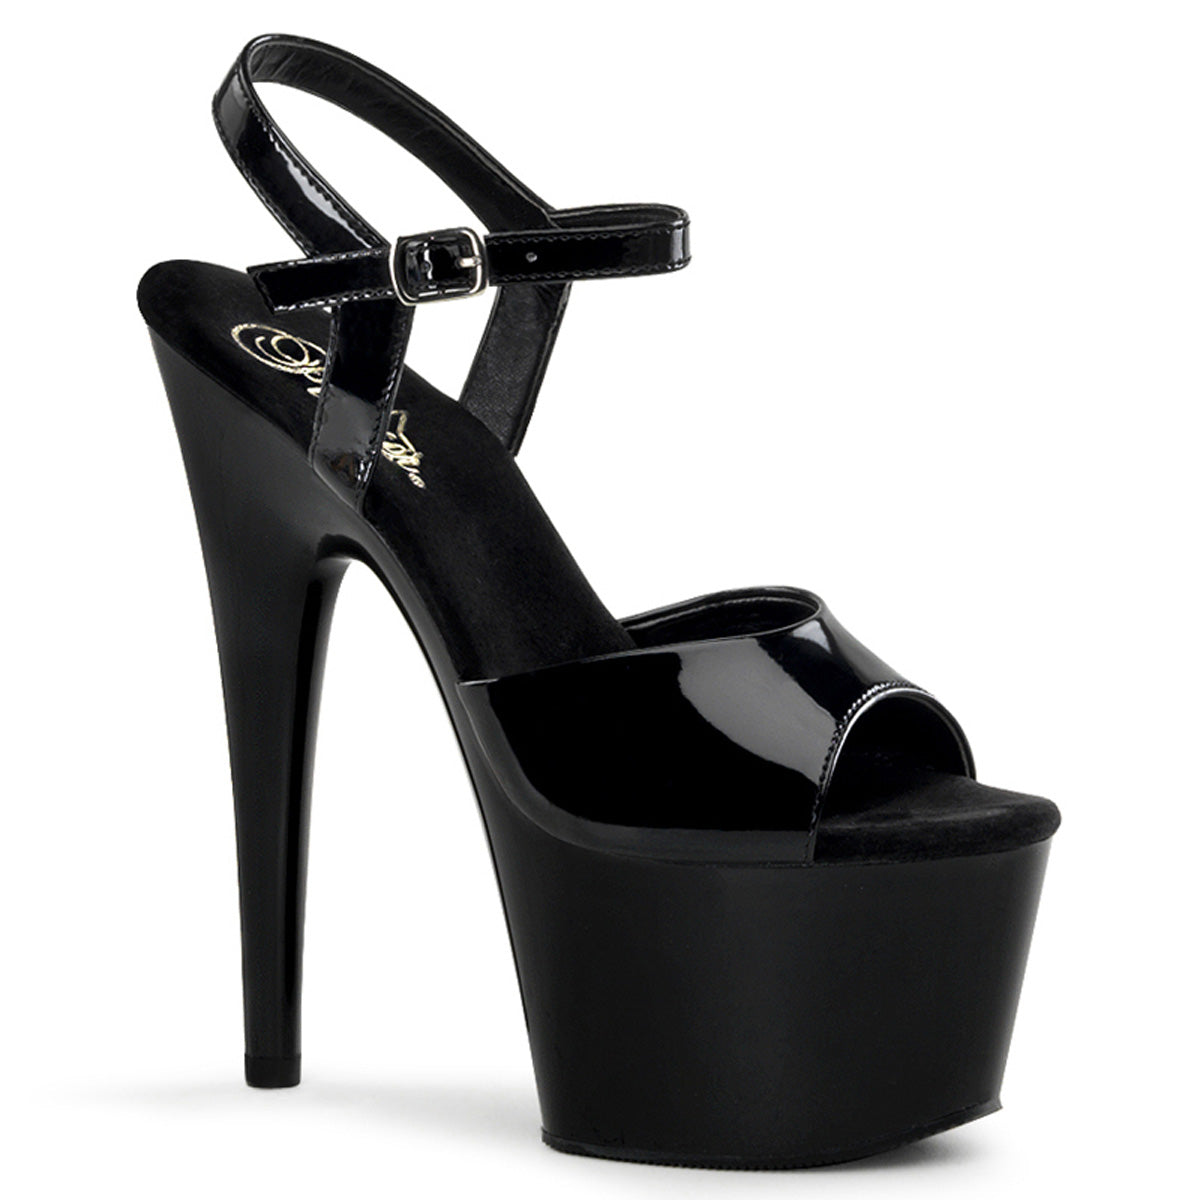 ADORE-709/B/M 7" PLEASER FAST DELIVERY 24-48h